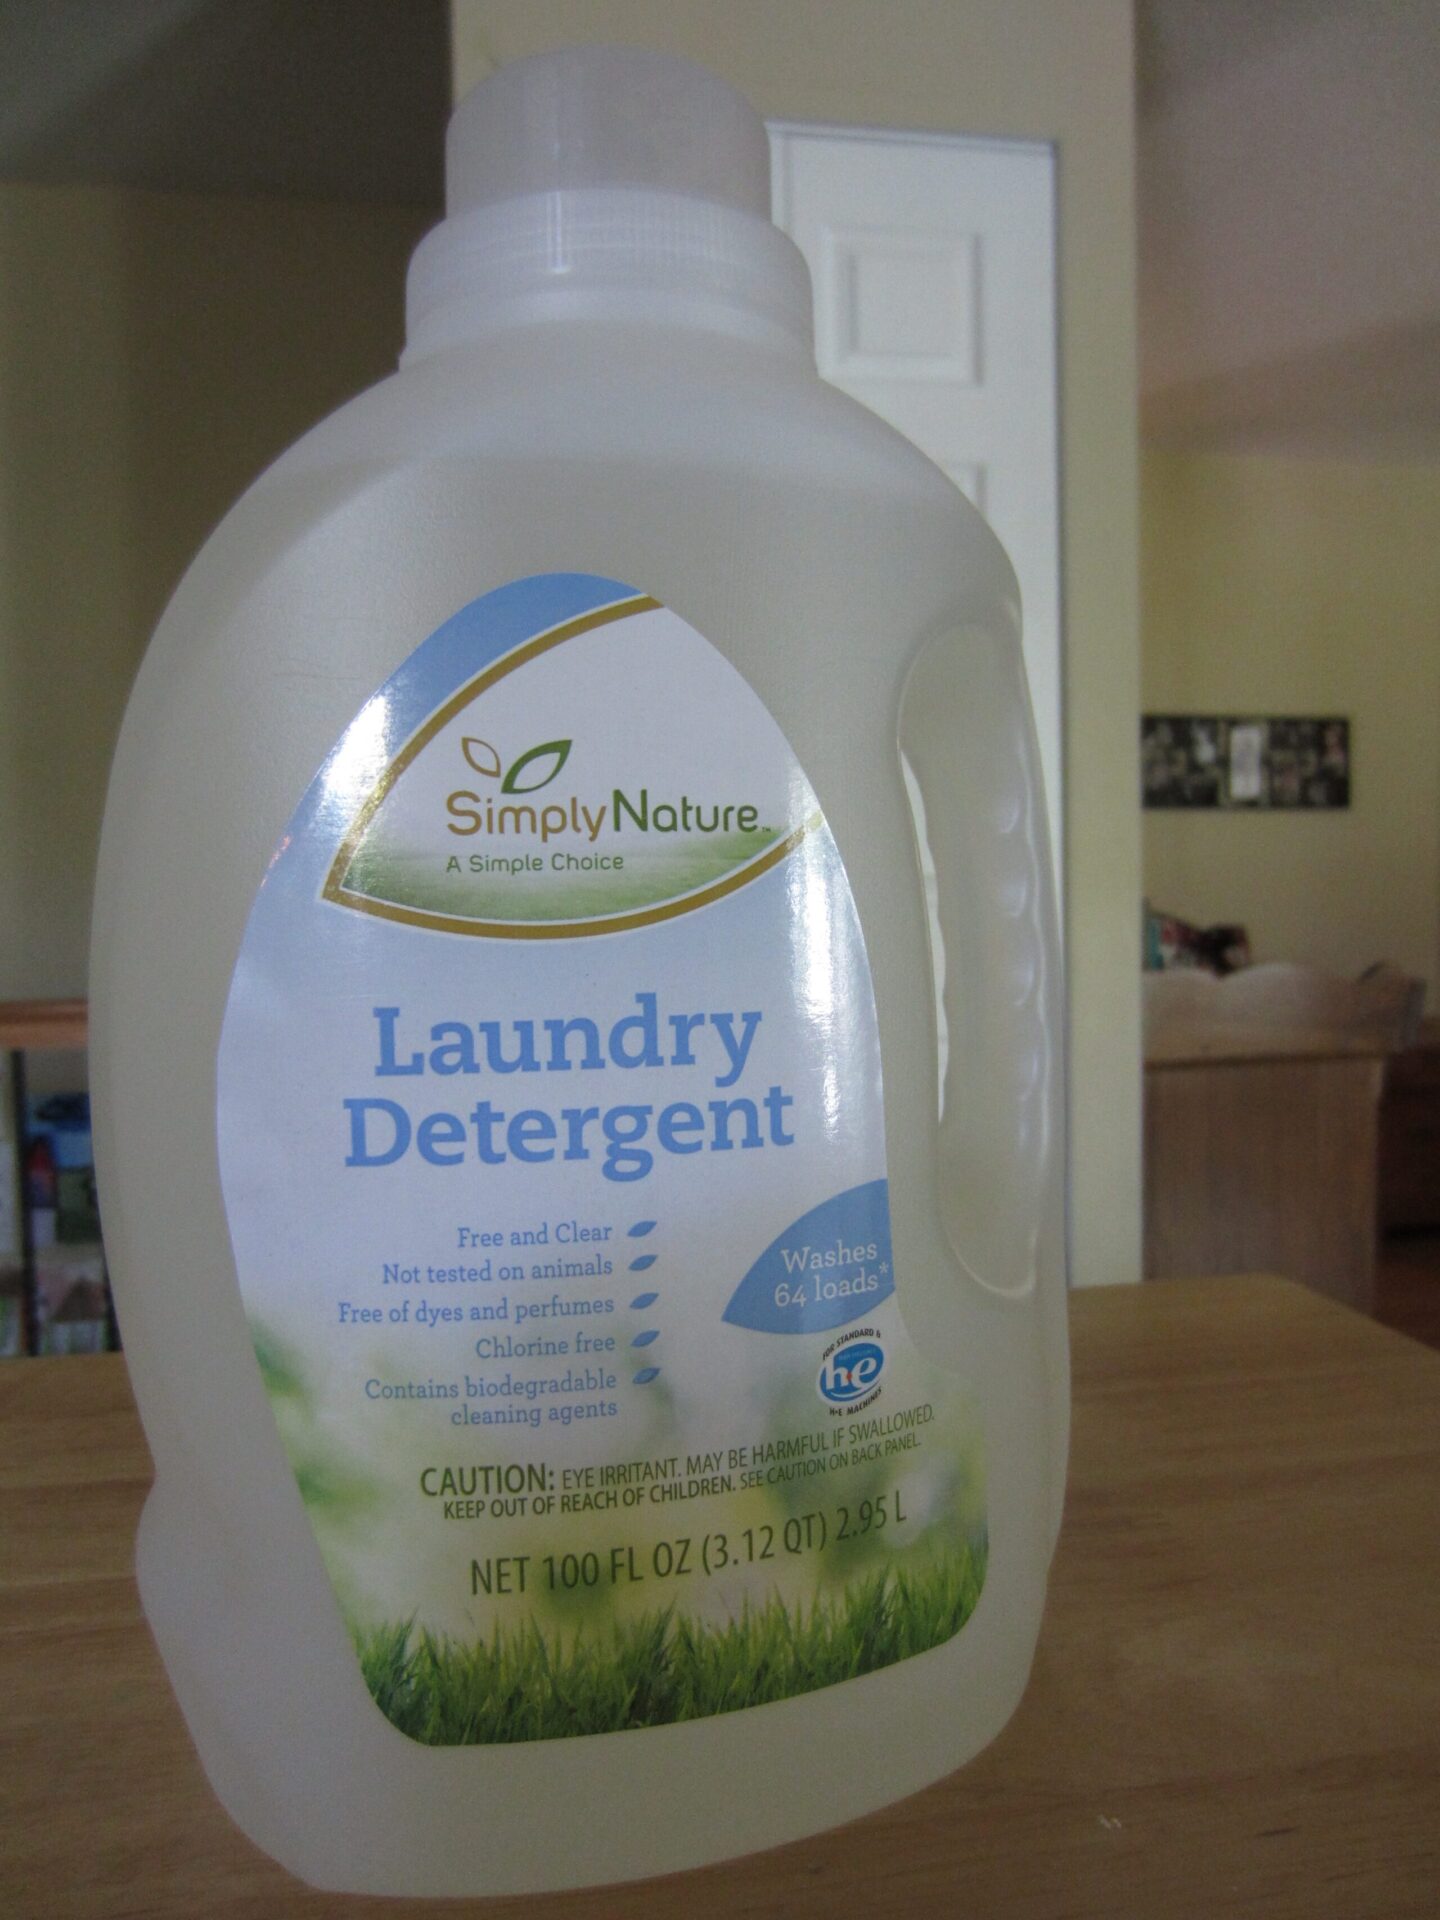 SimplyNature Laundry Detergent